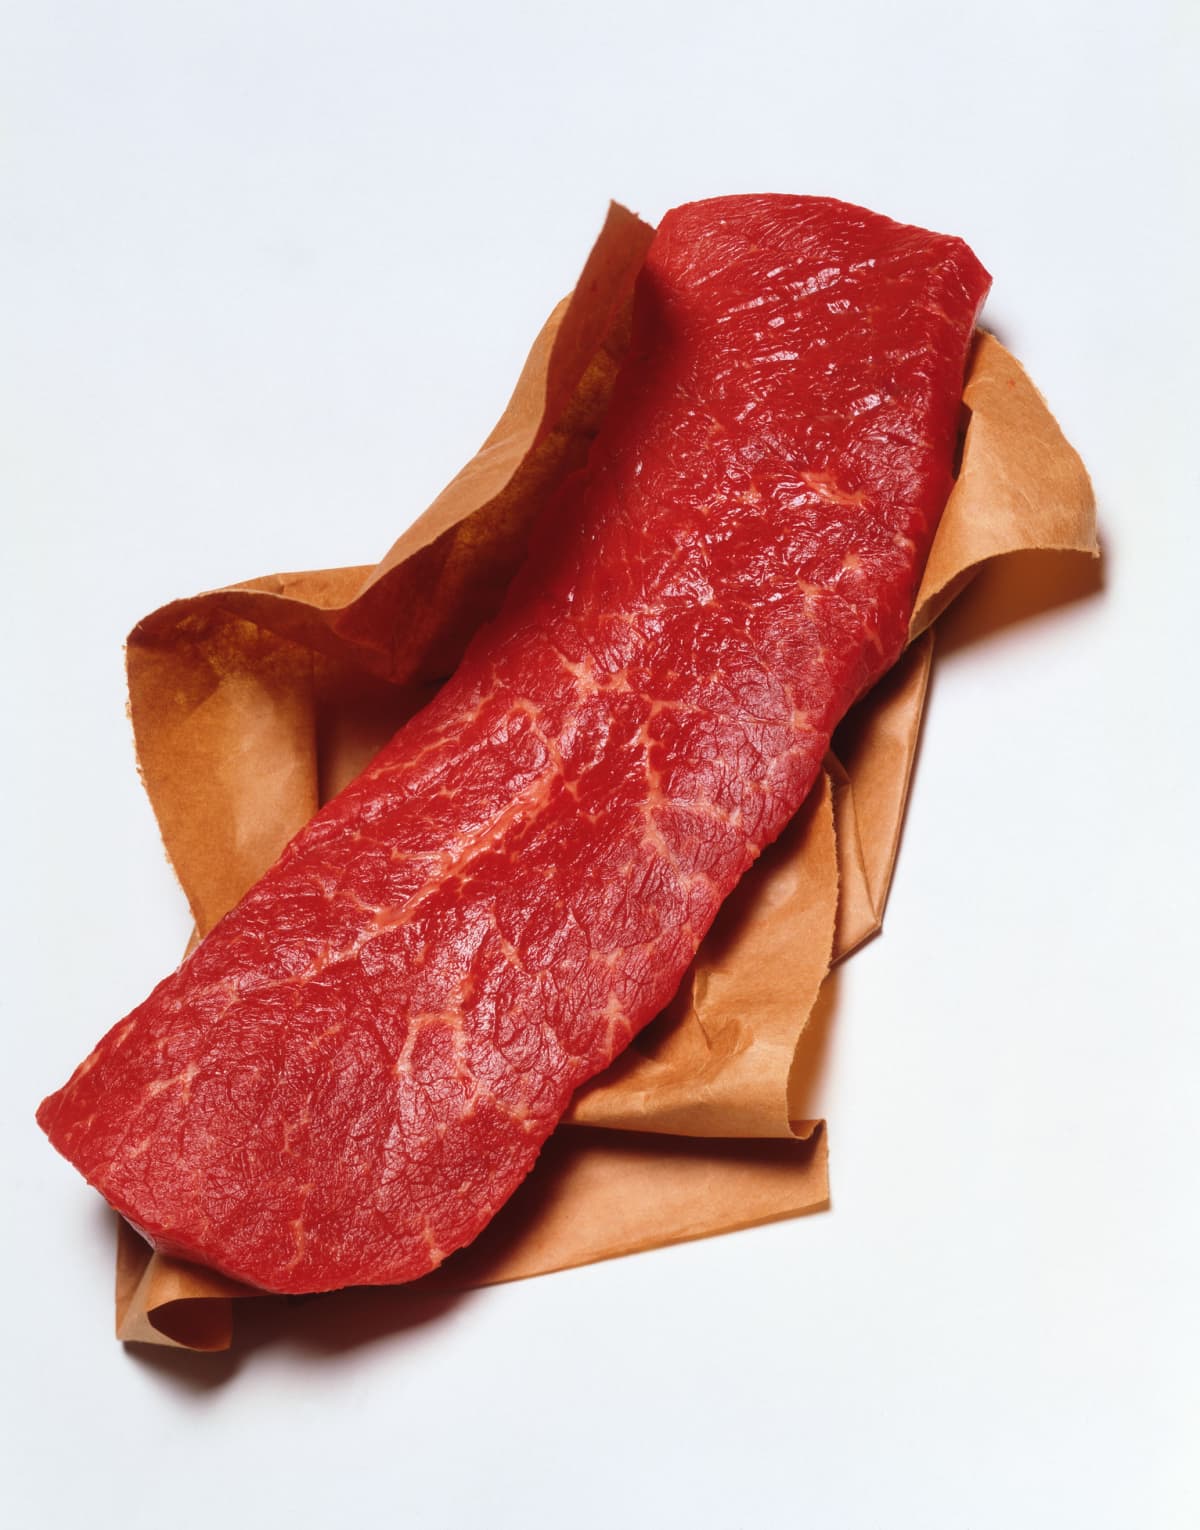 A slice of raw skirt steak on a white background.